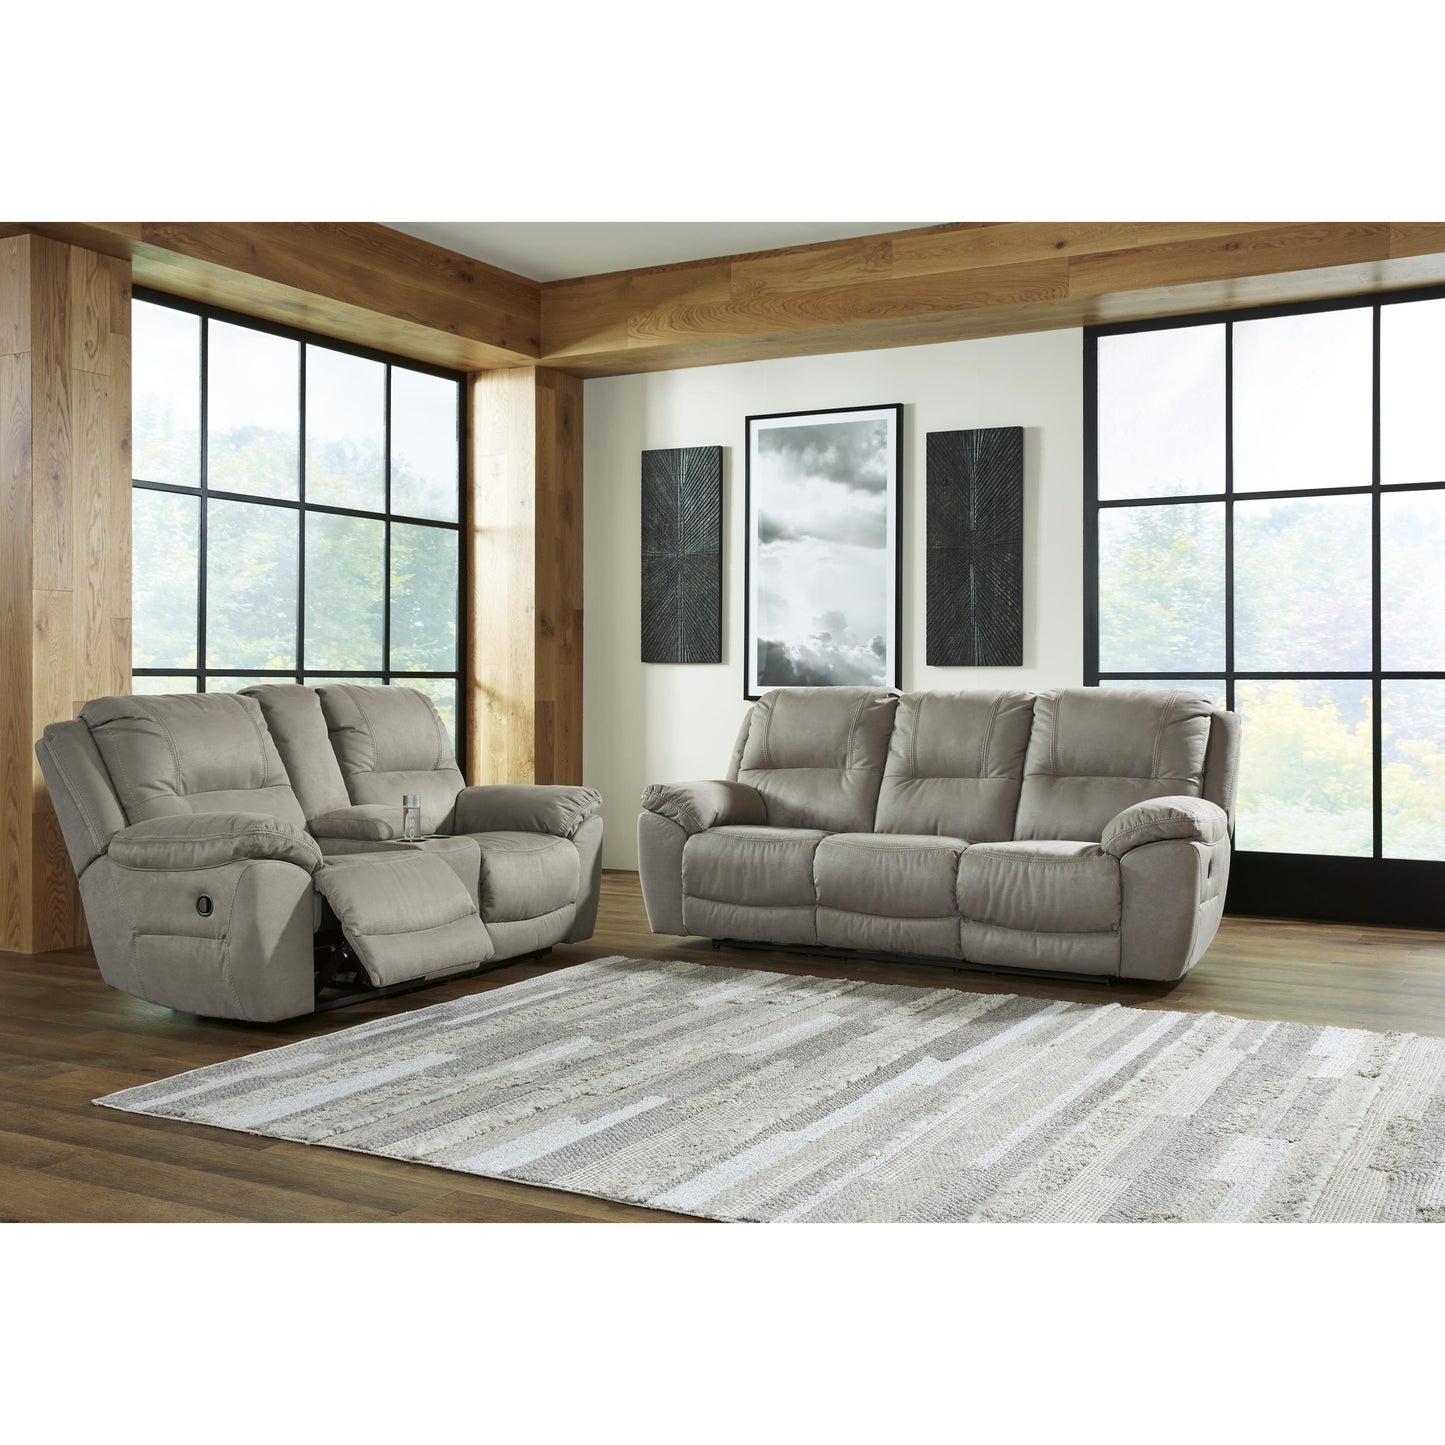 Signature Design by Ashley Next-Gen Gaucho Reclining Leather Look Loveseat 5420394 IMAGE 7